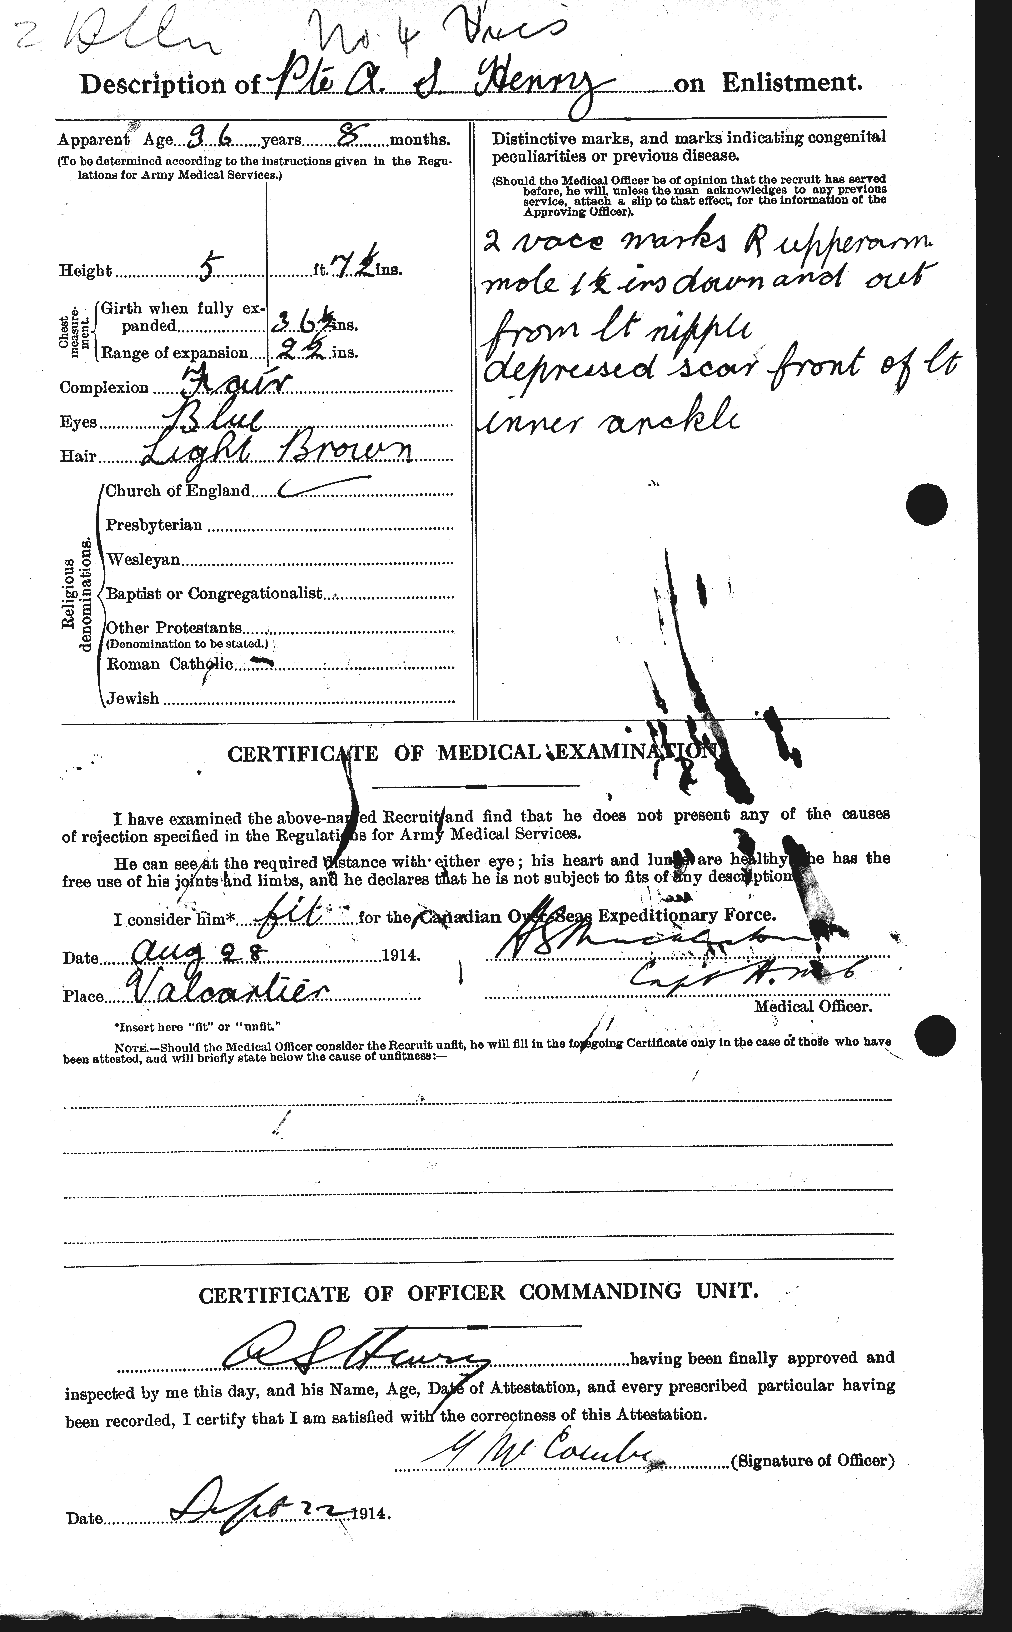 Personnel Records of the First World War - CEF 392771b